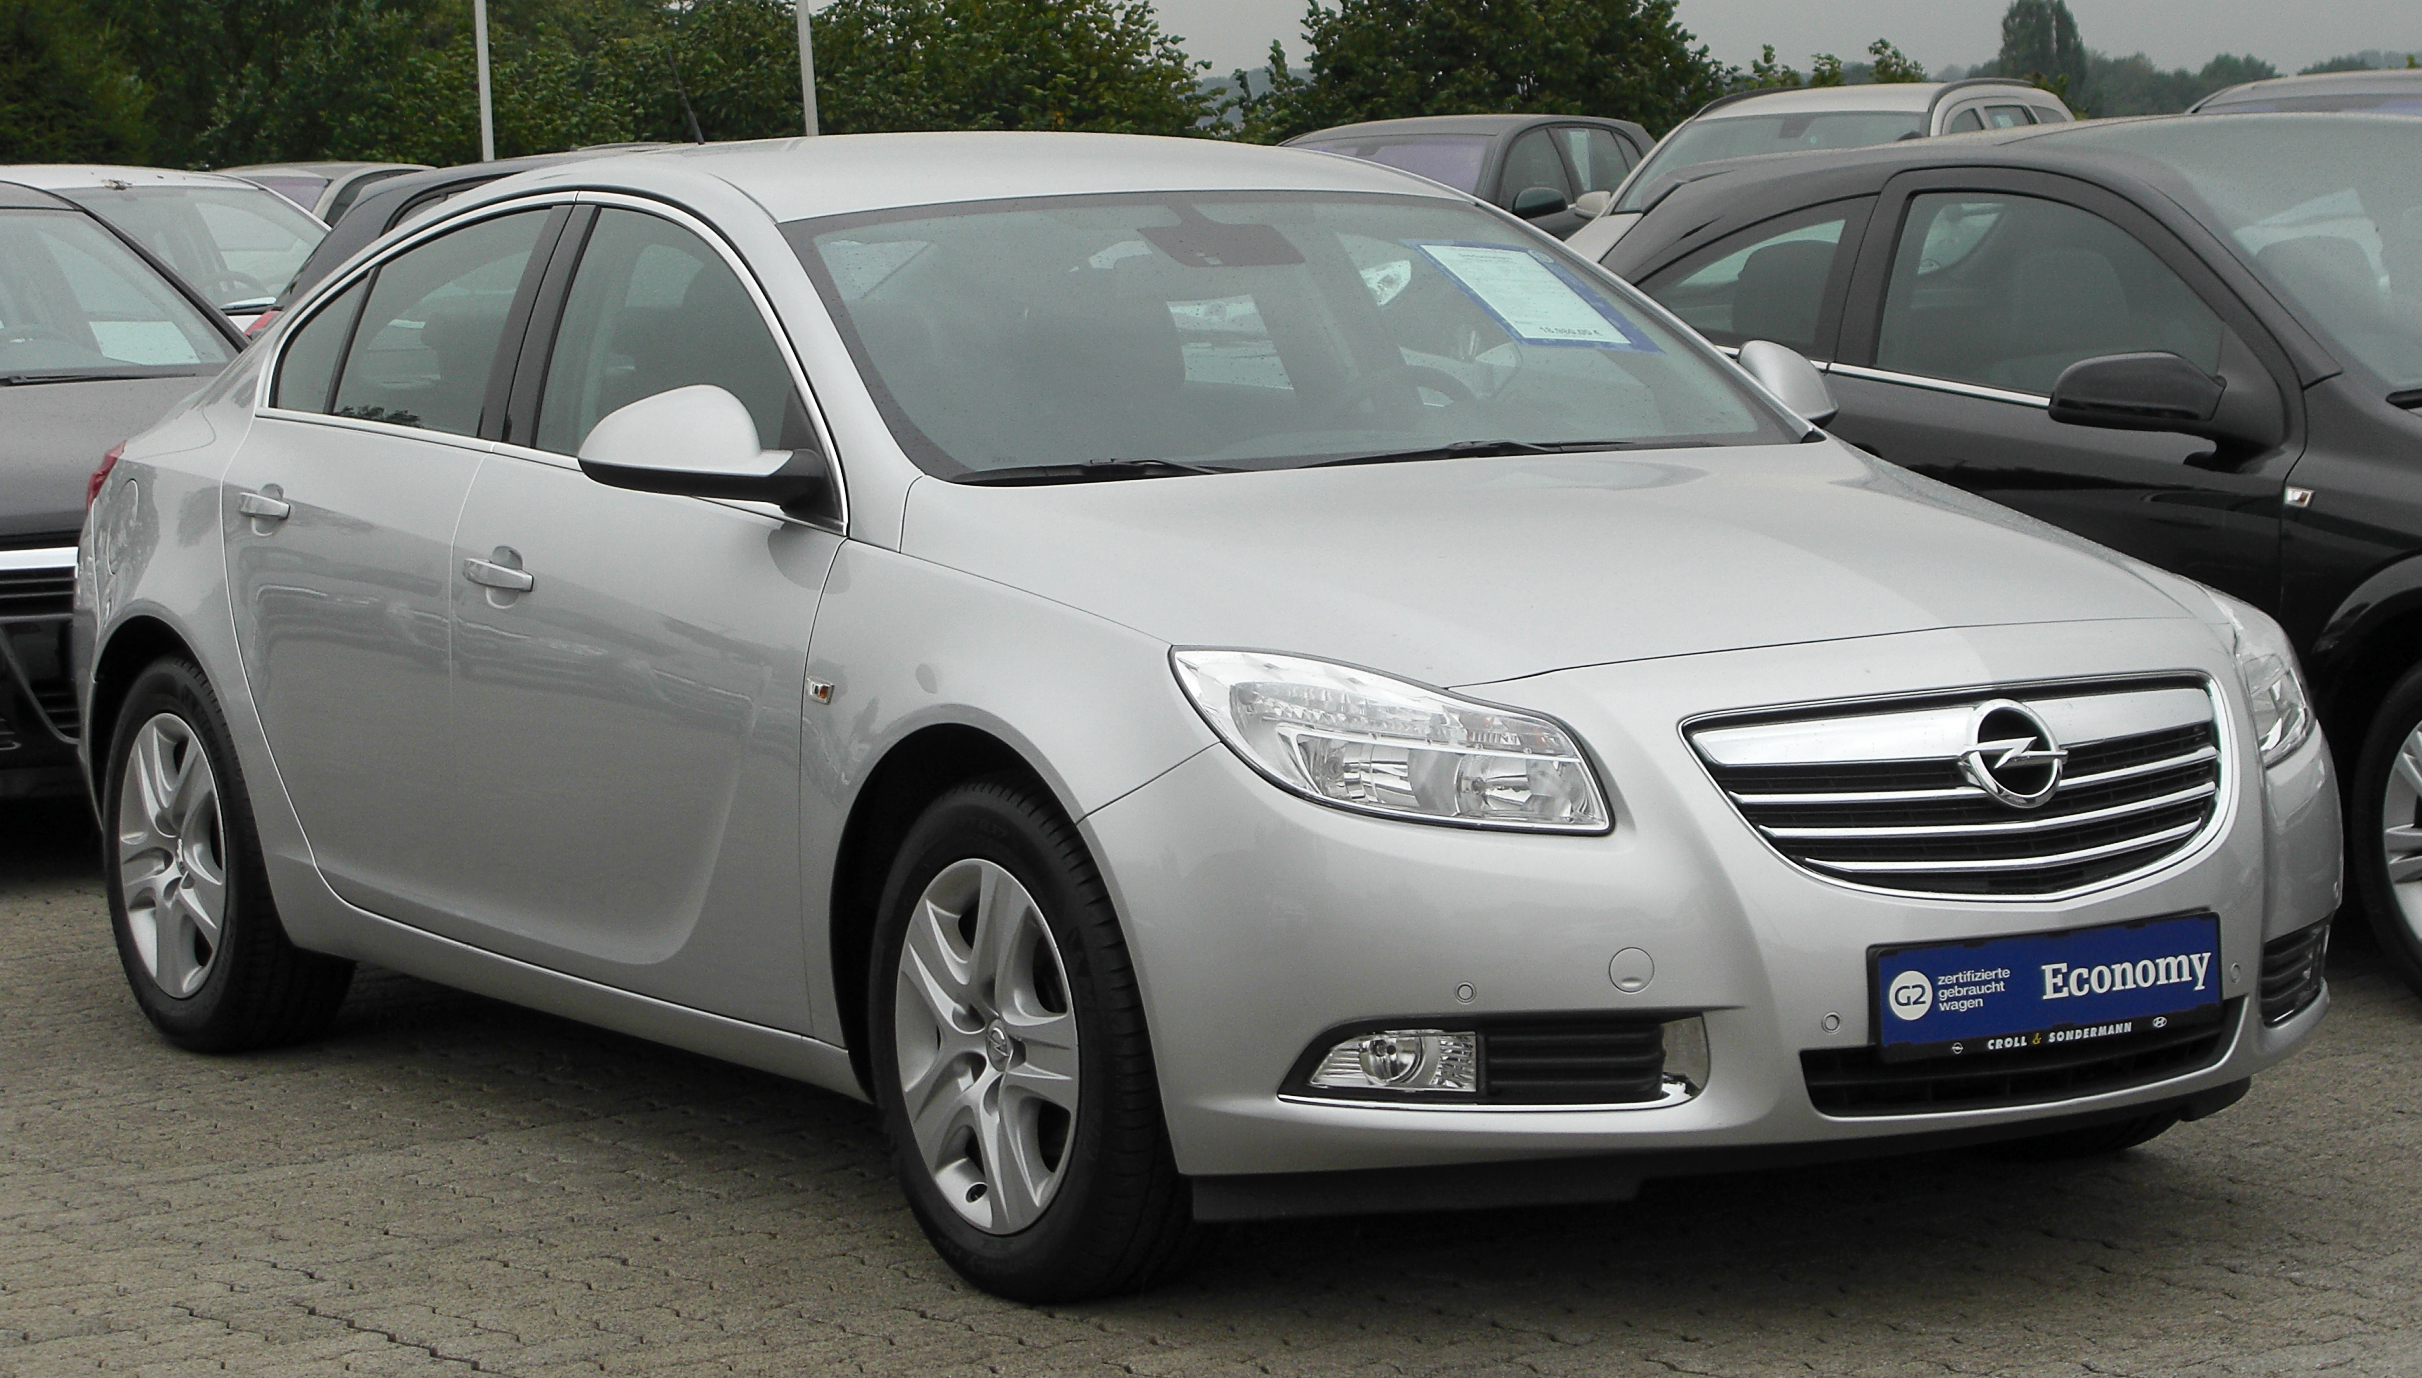 File:Opel Insignia 1.6 Edition front 20100912.jpg